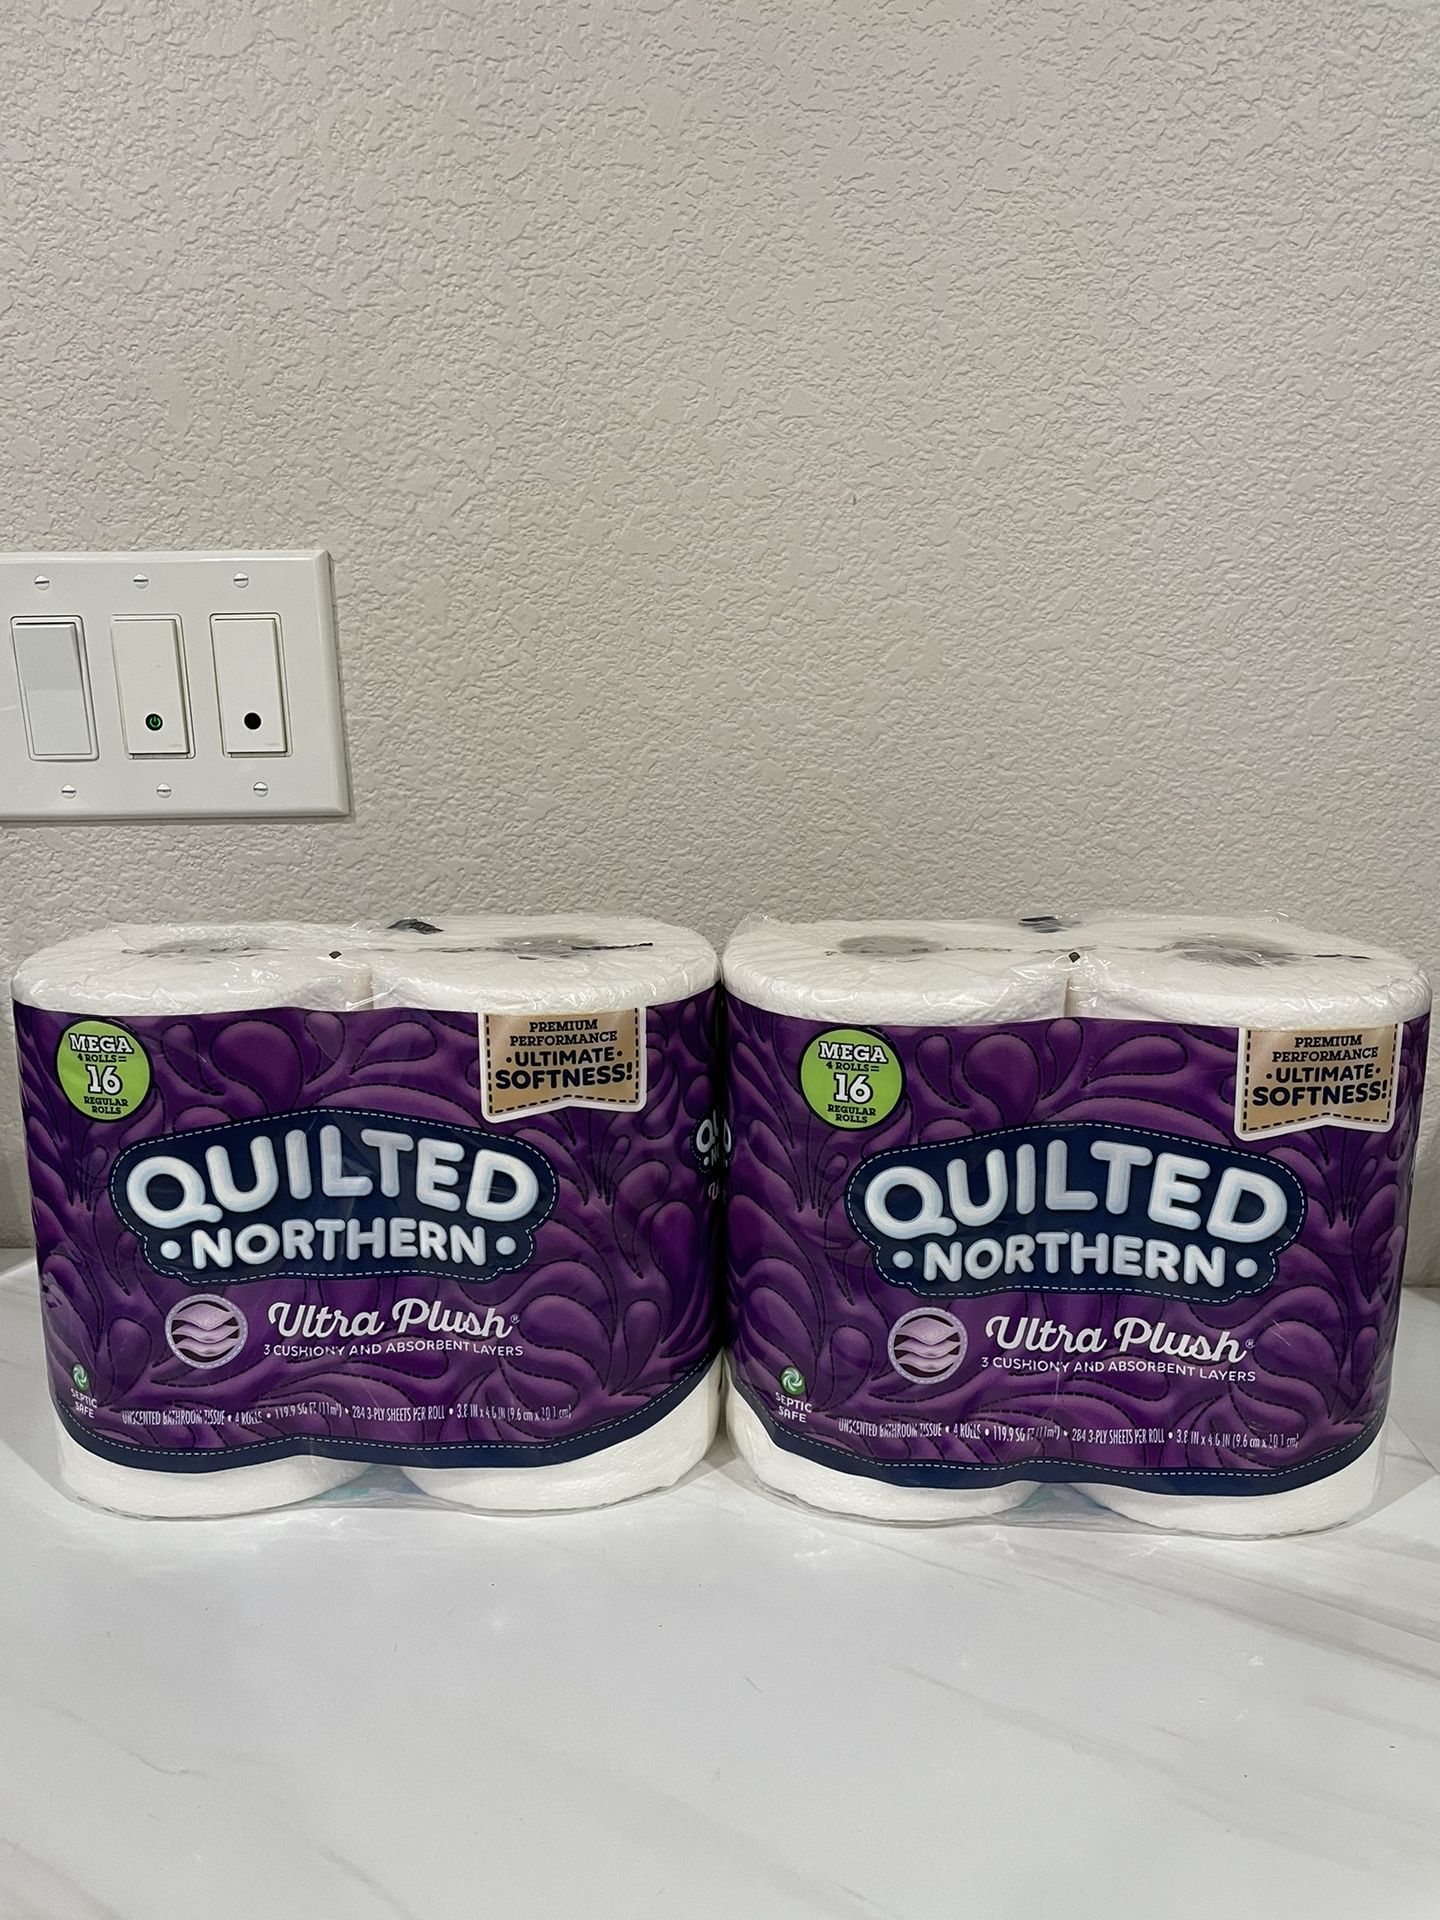 Quilted Northern Ultra Plush Bathroom Tissue